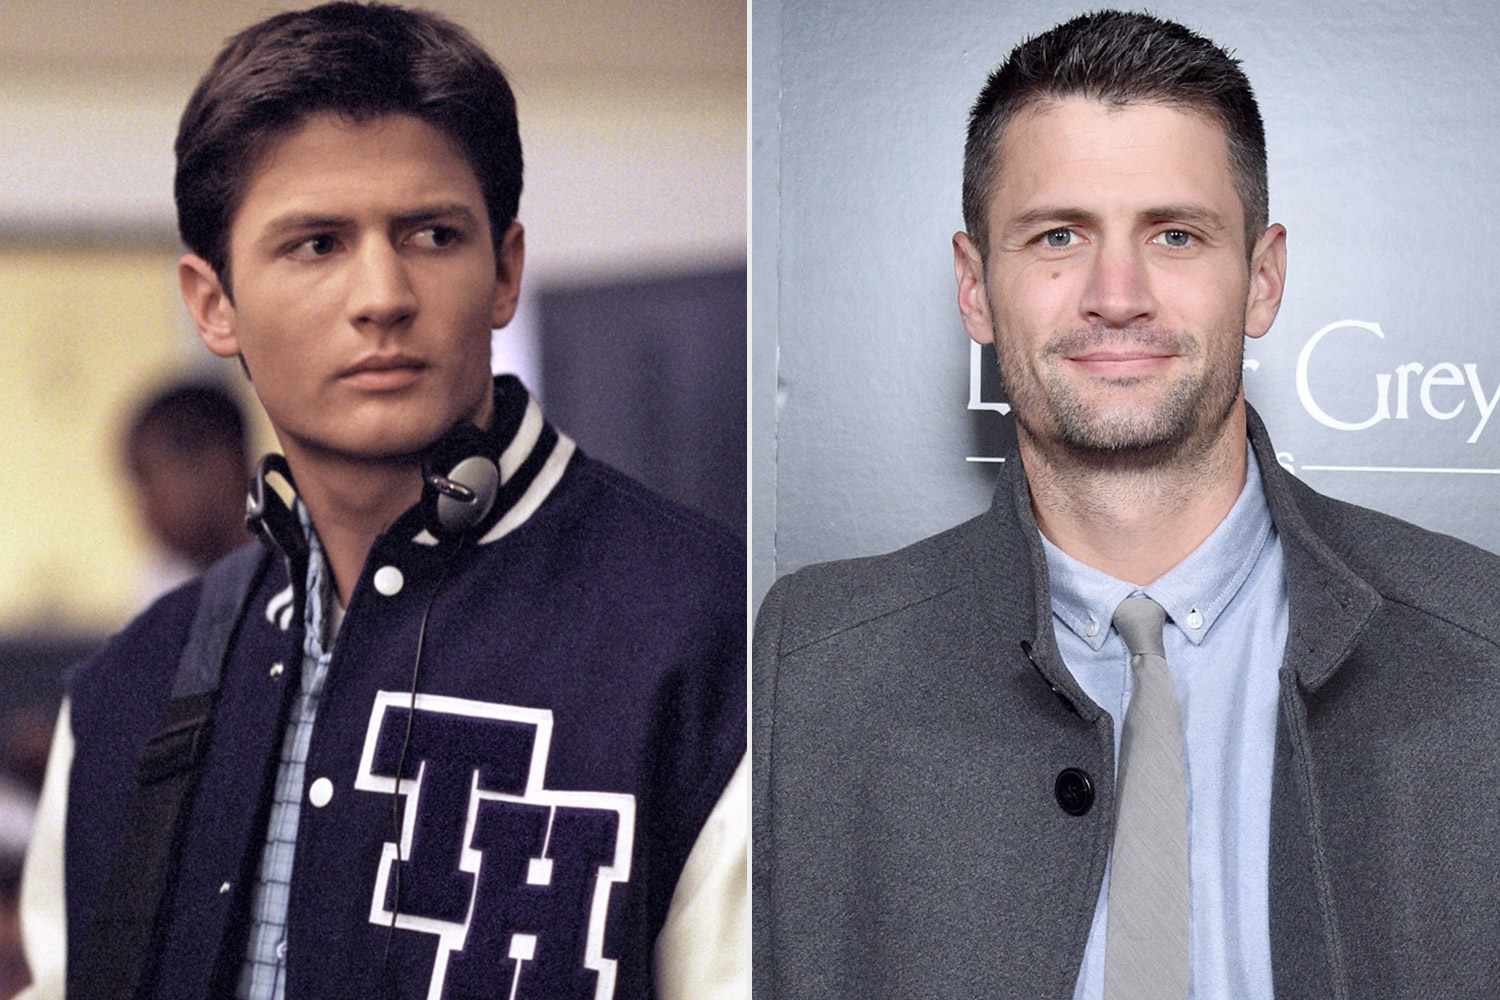 James Lafferty Was Ready to Walk Away from Acting Before Booking “One Tree Hill”: ‘My Last Shot’ (Exclusive)